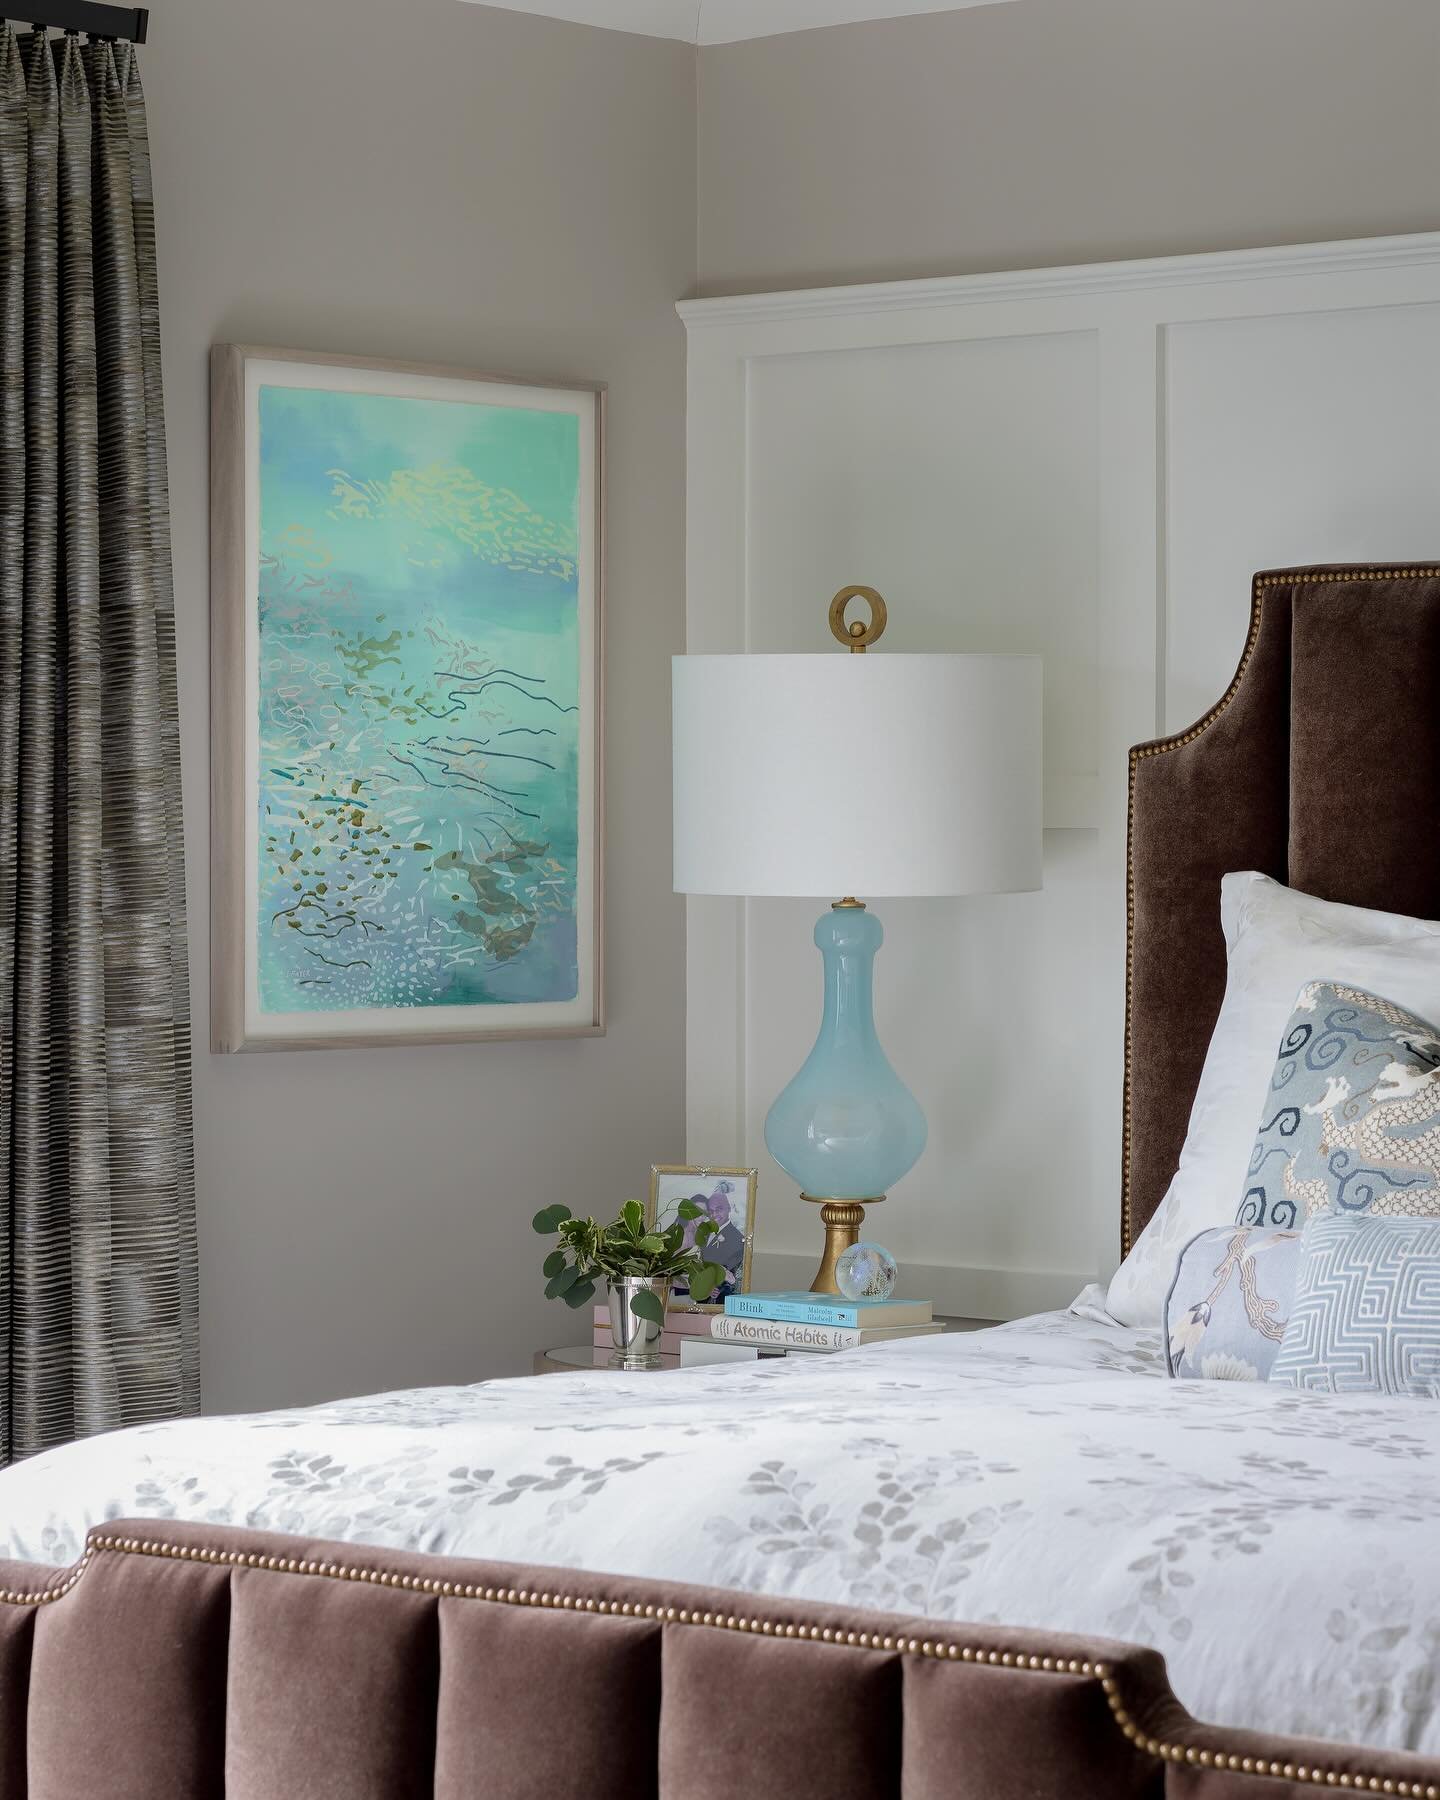 Soft blues and browns.  I love the mix and the Yin and Yang of feminine and masculine. Just a reminder to start your week off right and Make Your Bed! 😉
#KMInteriors 
#vibrant #collected #intuitive 
📸: @michaeljleephotography